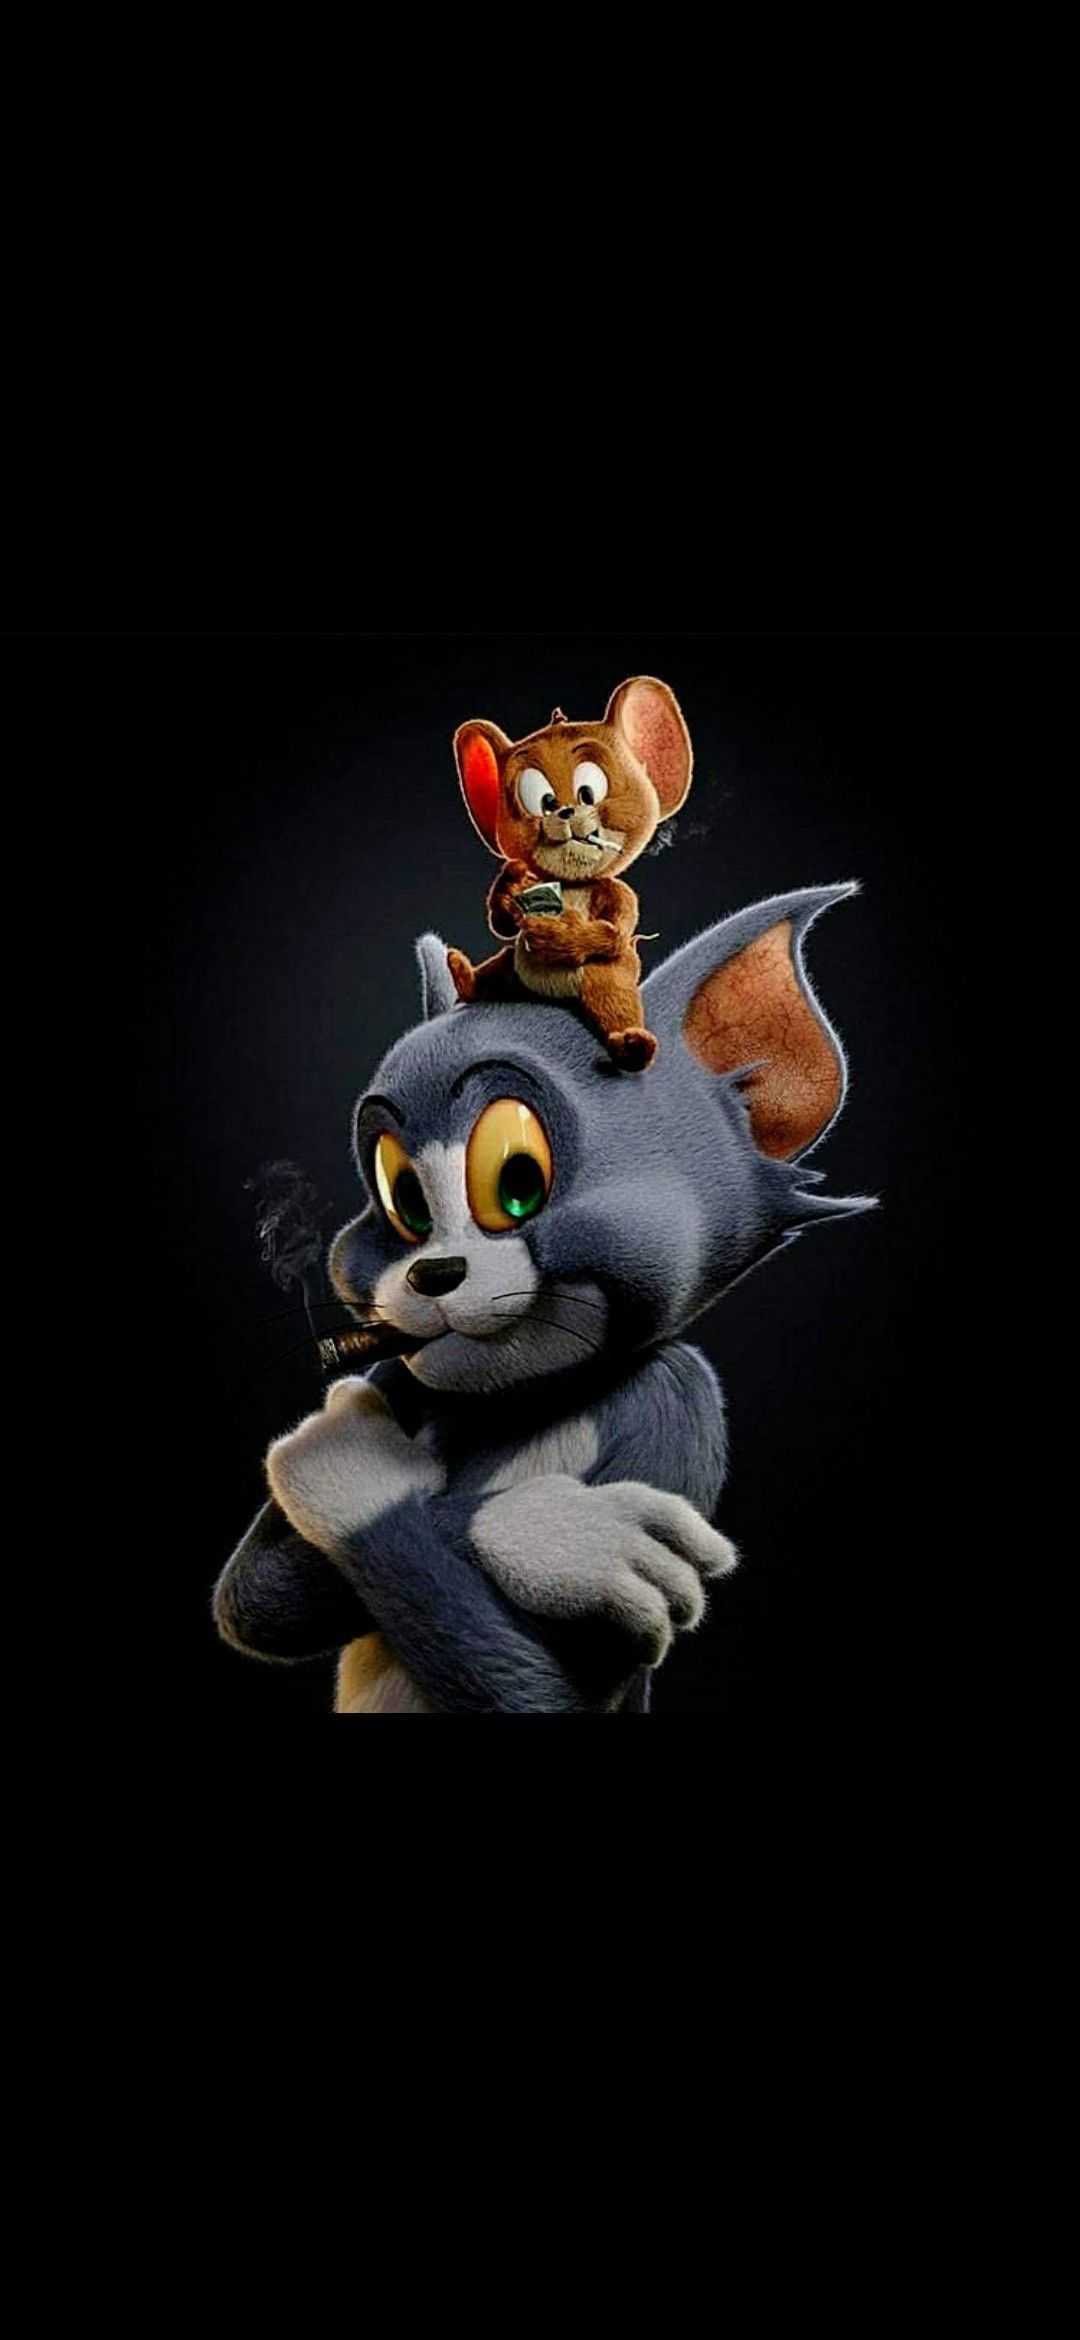 4K Tom And Jerry Wallpaper - iXpap